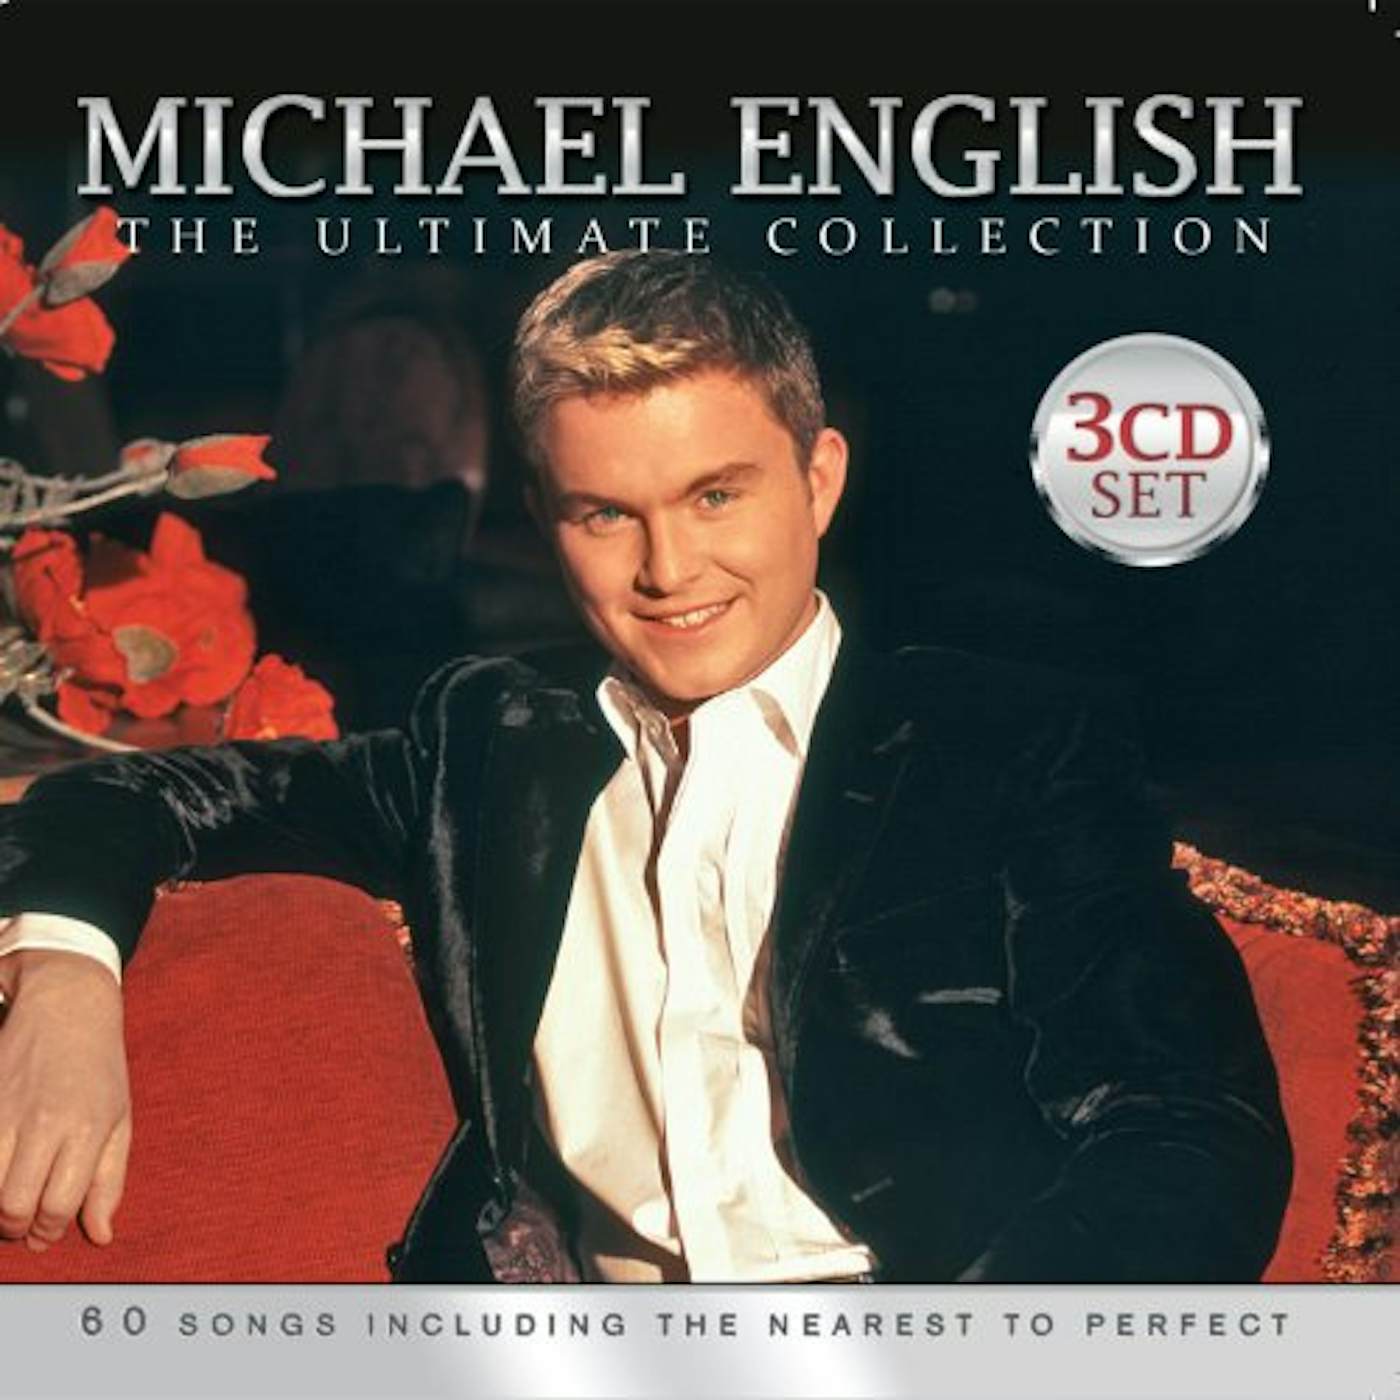 Michael English ULTIMATE COLLECTION CD